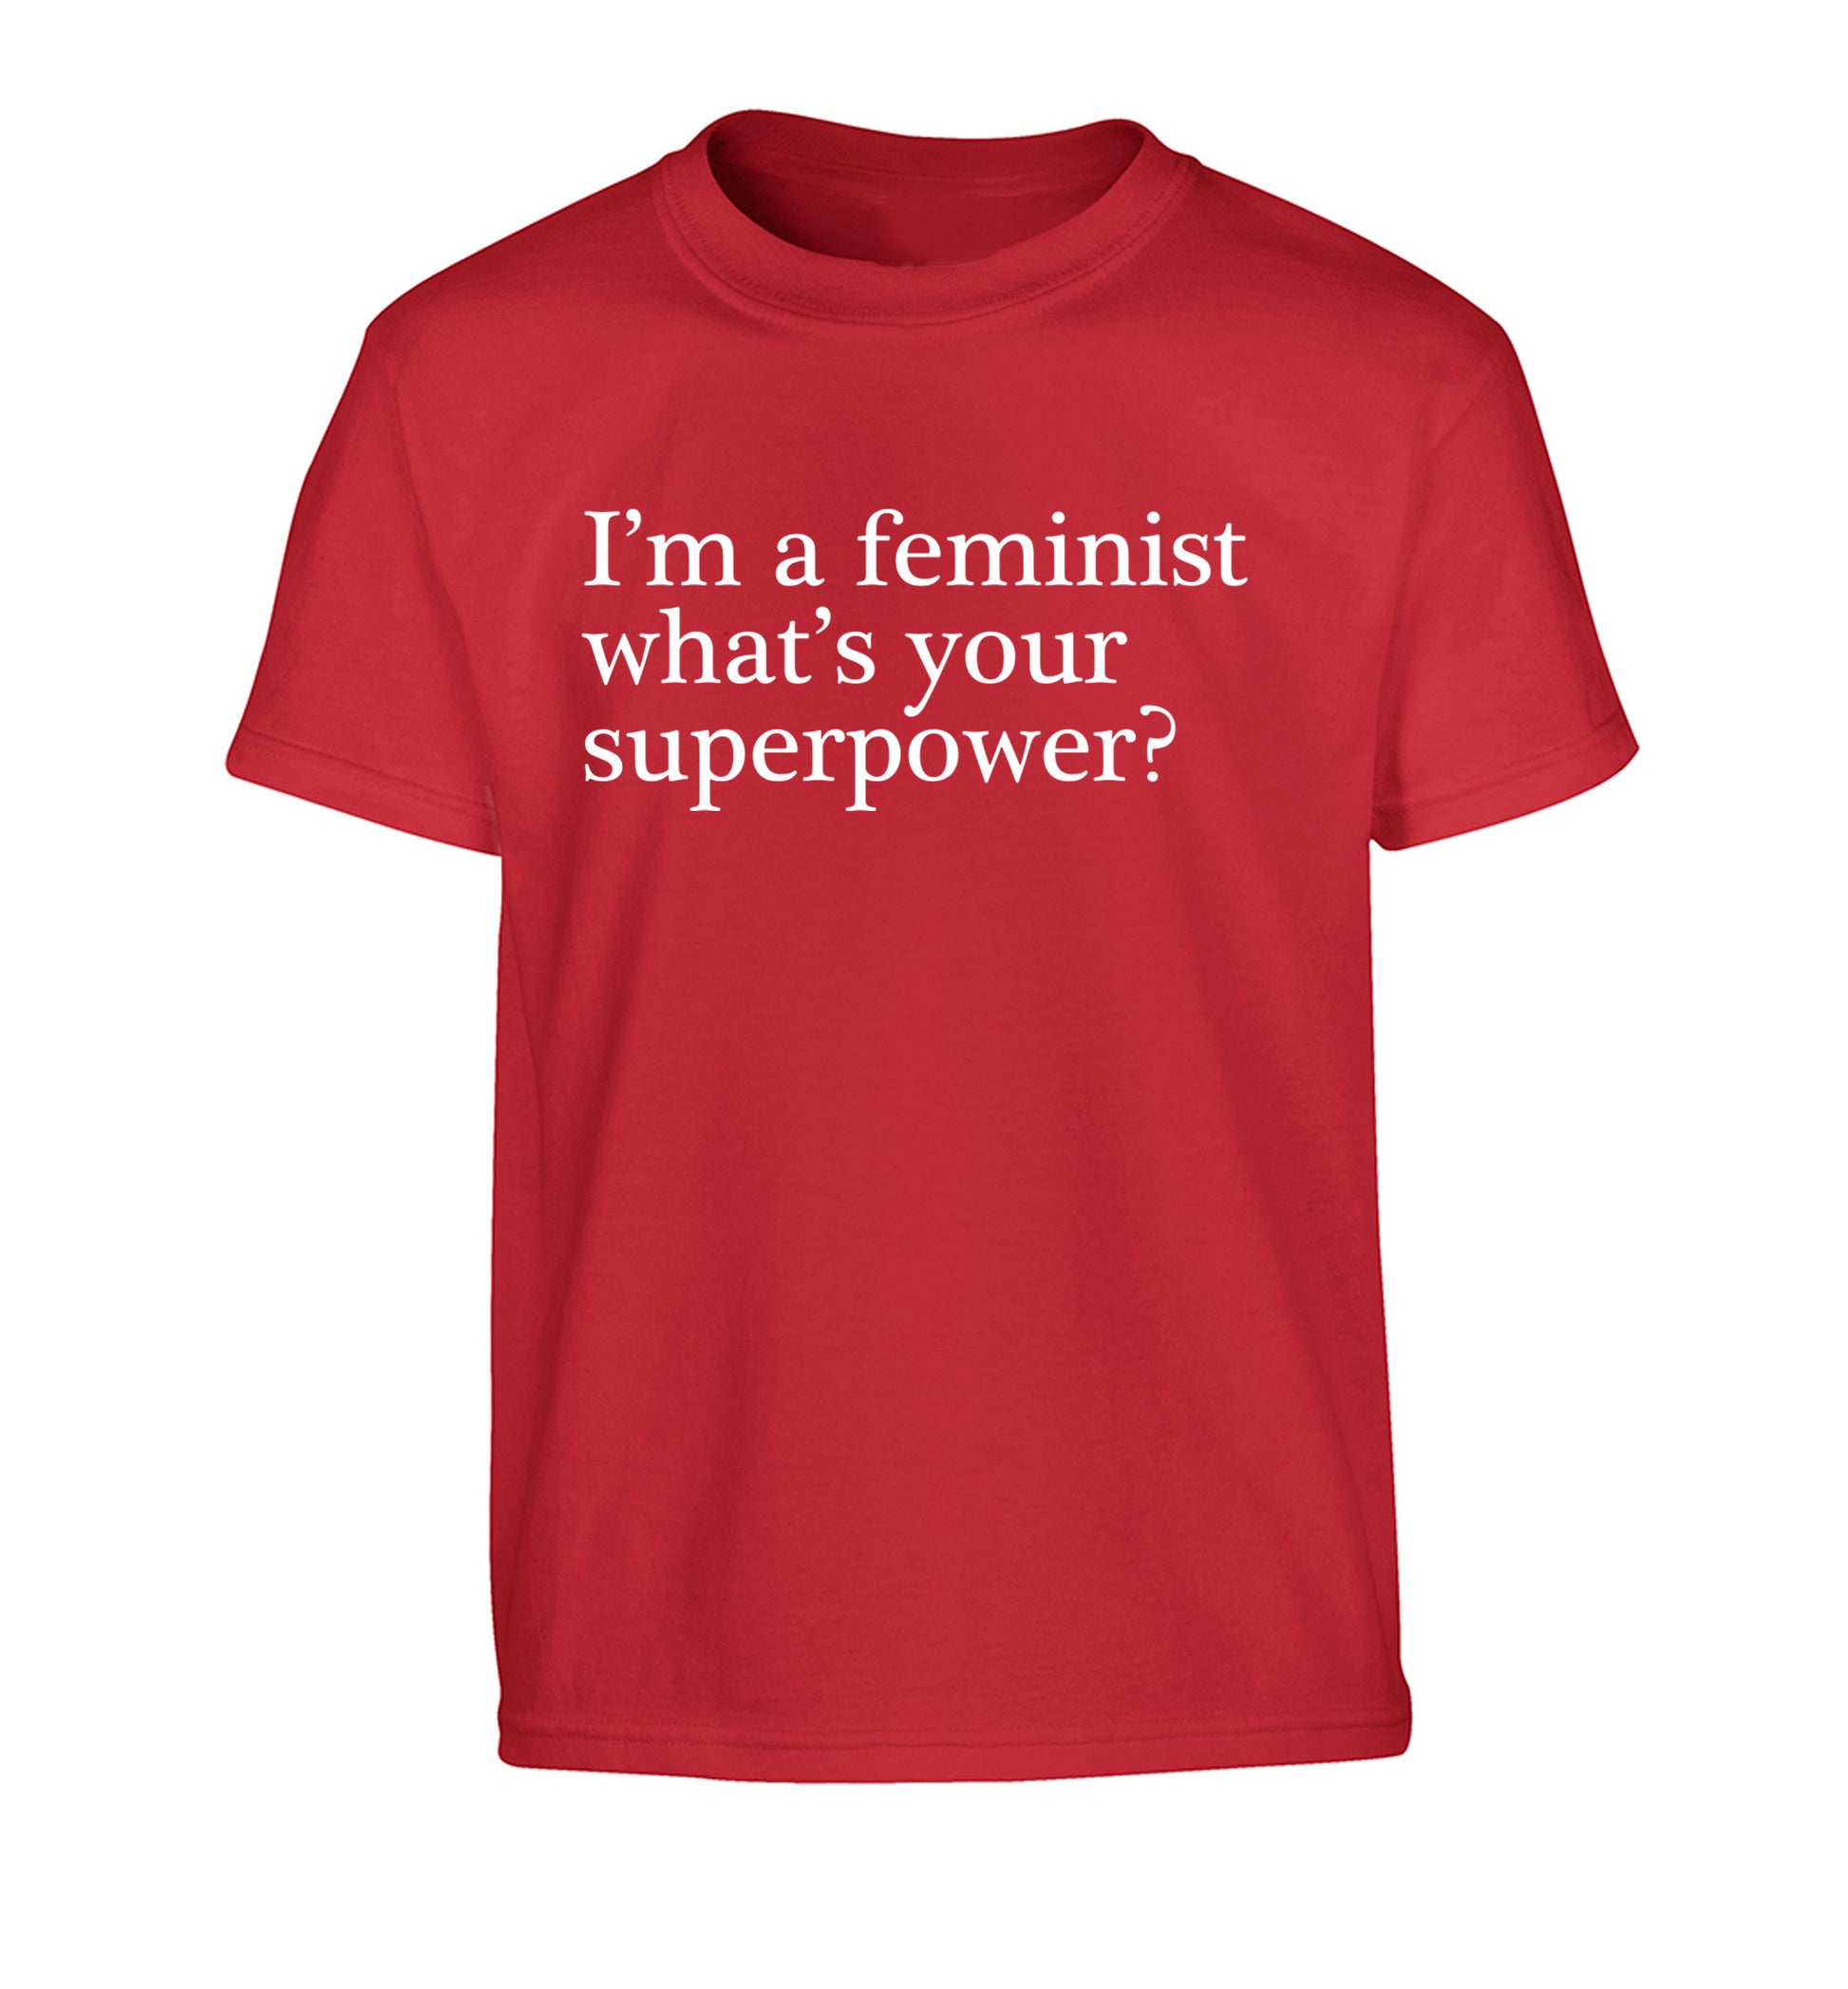 I'm a feminist what's your superpower? Children's red Tshirt 12-14 Years